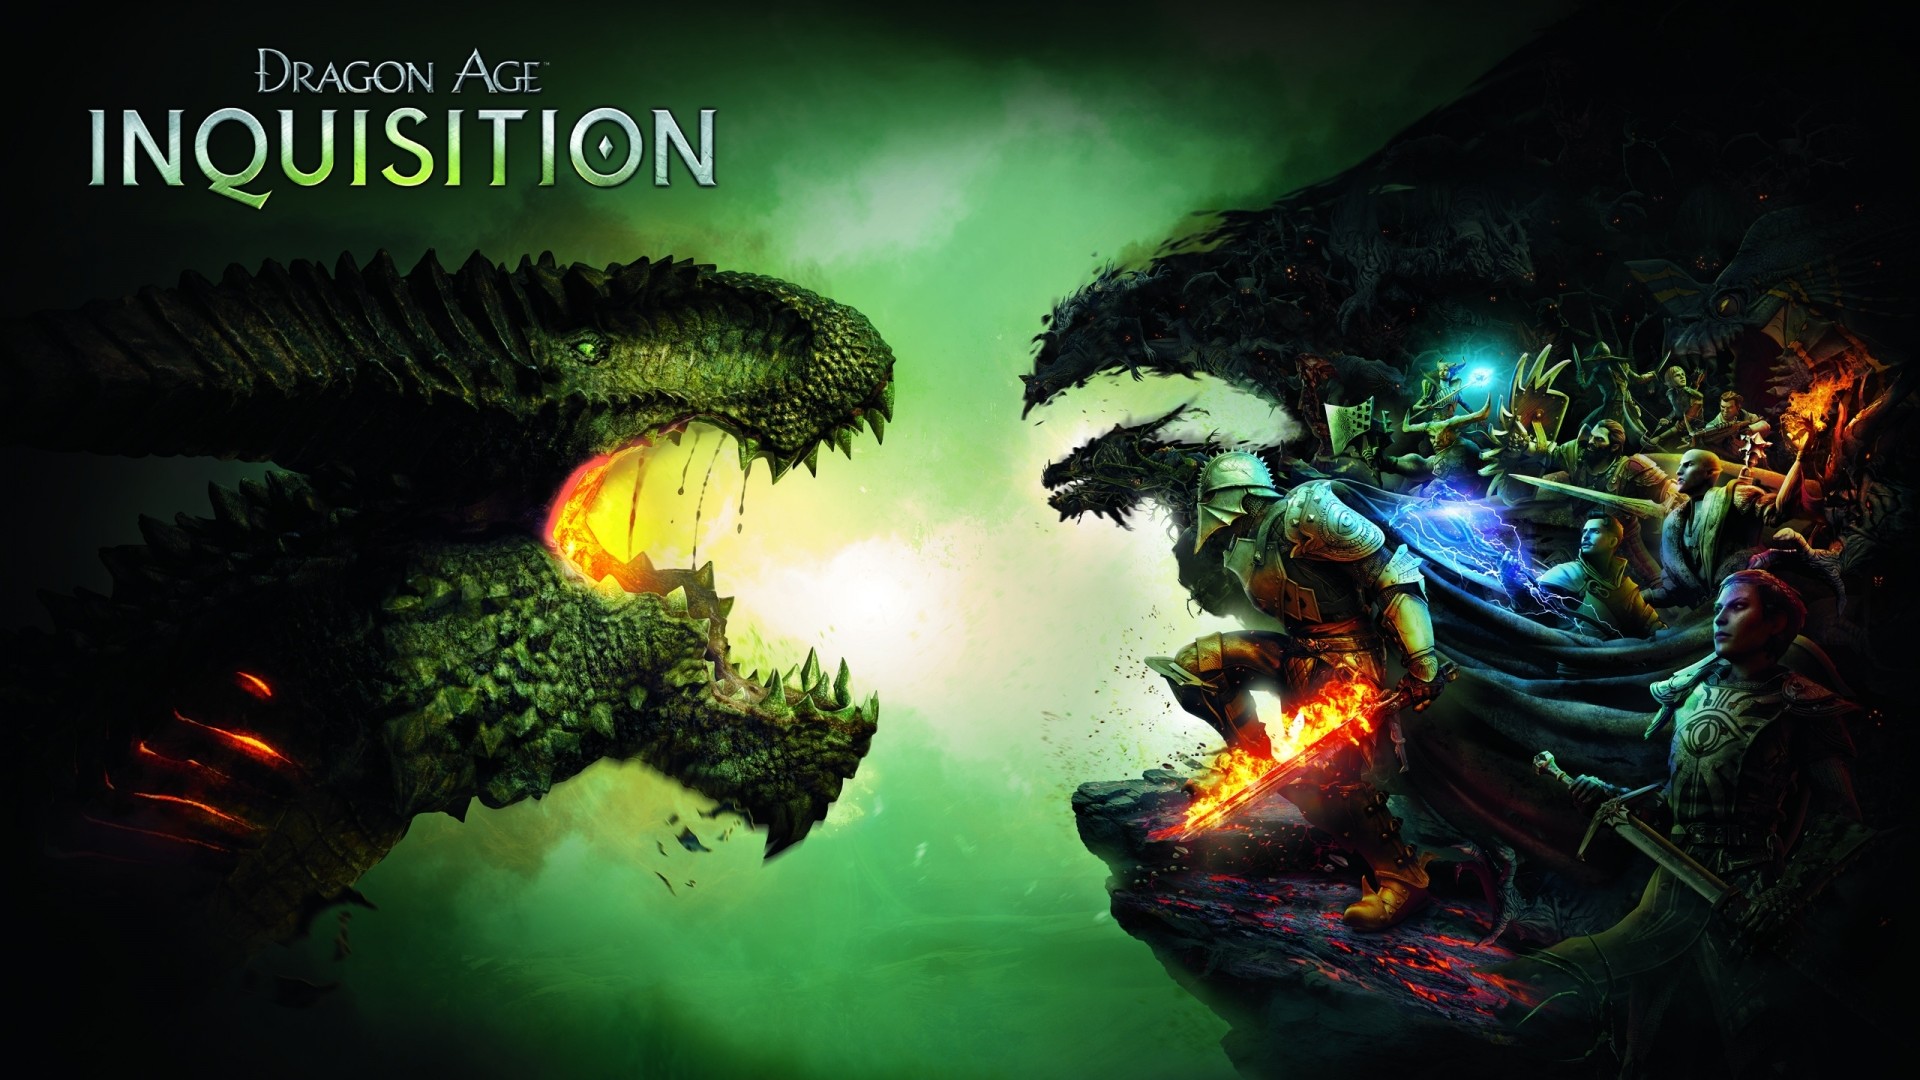 1920x1080 Wallpaper Juego Dragon Age Inquisition Images